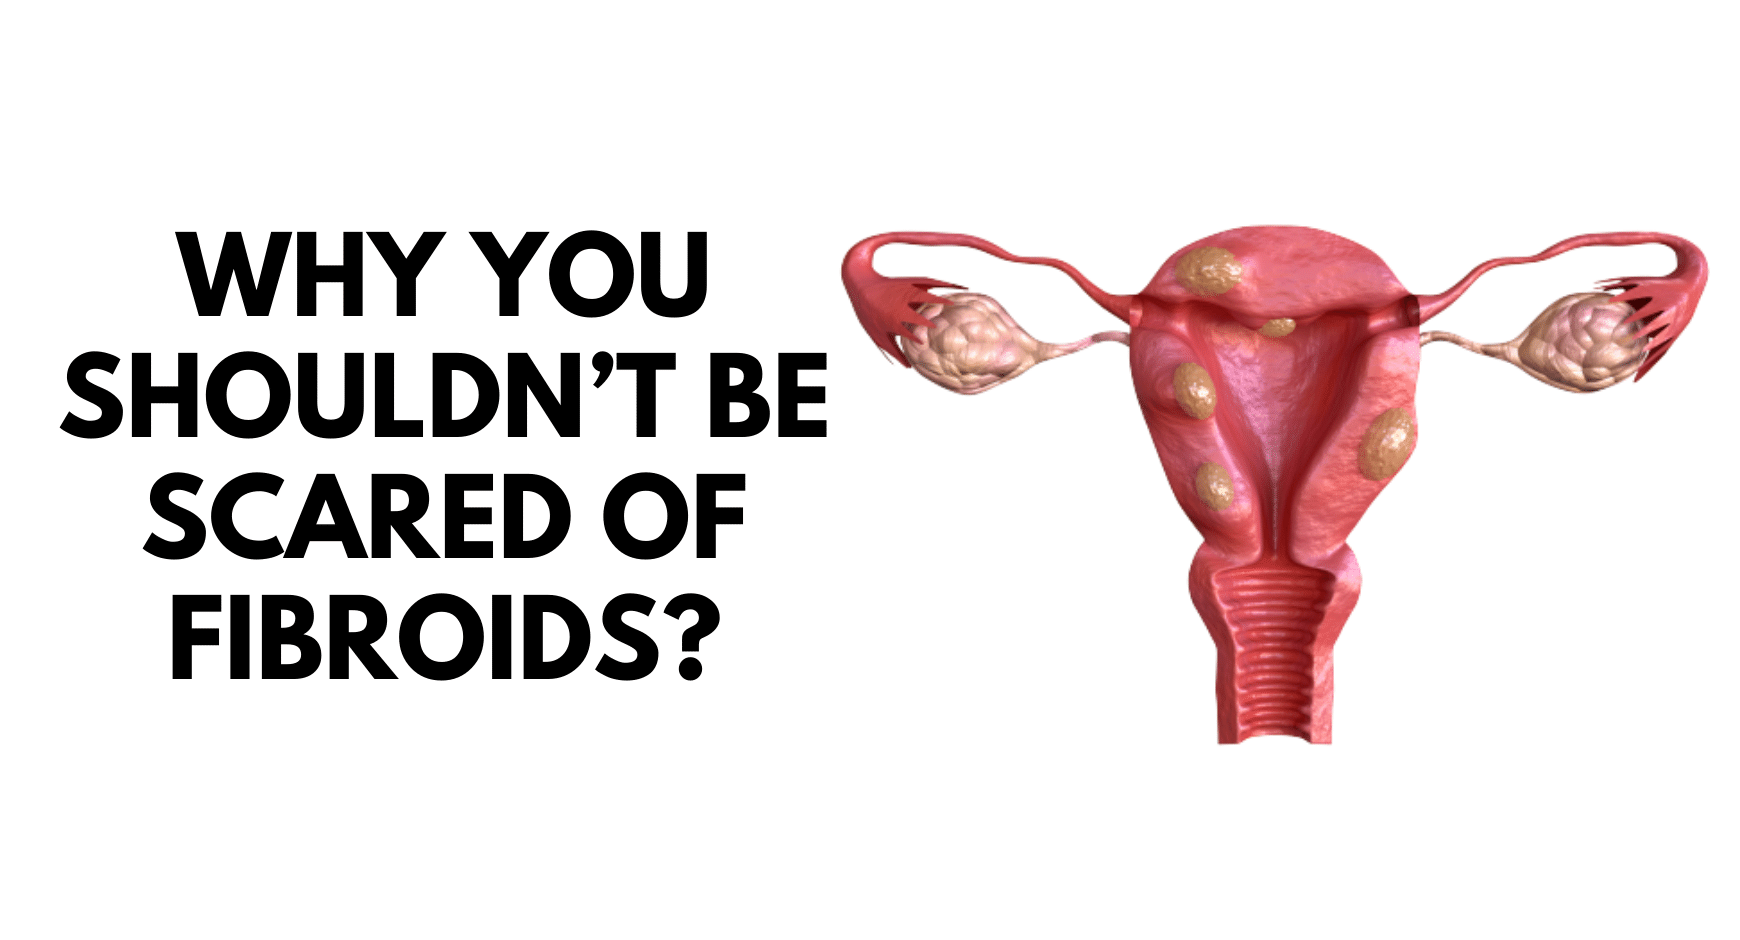 Why you shouldn’t be scared of Fibroids?